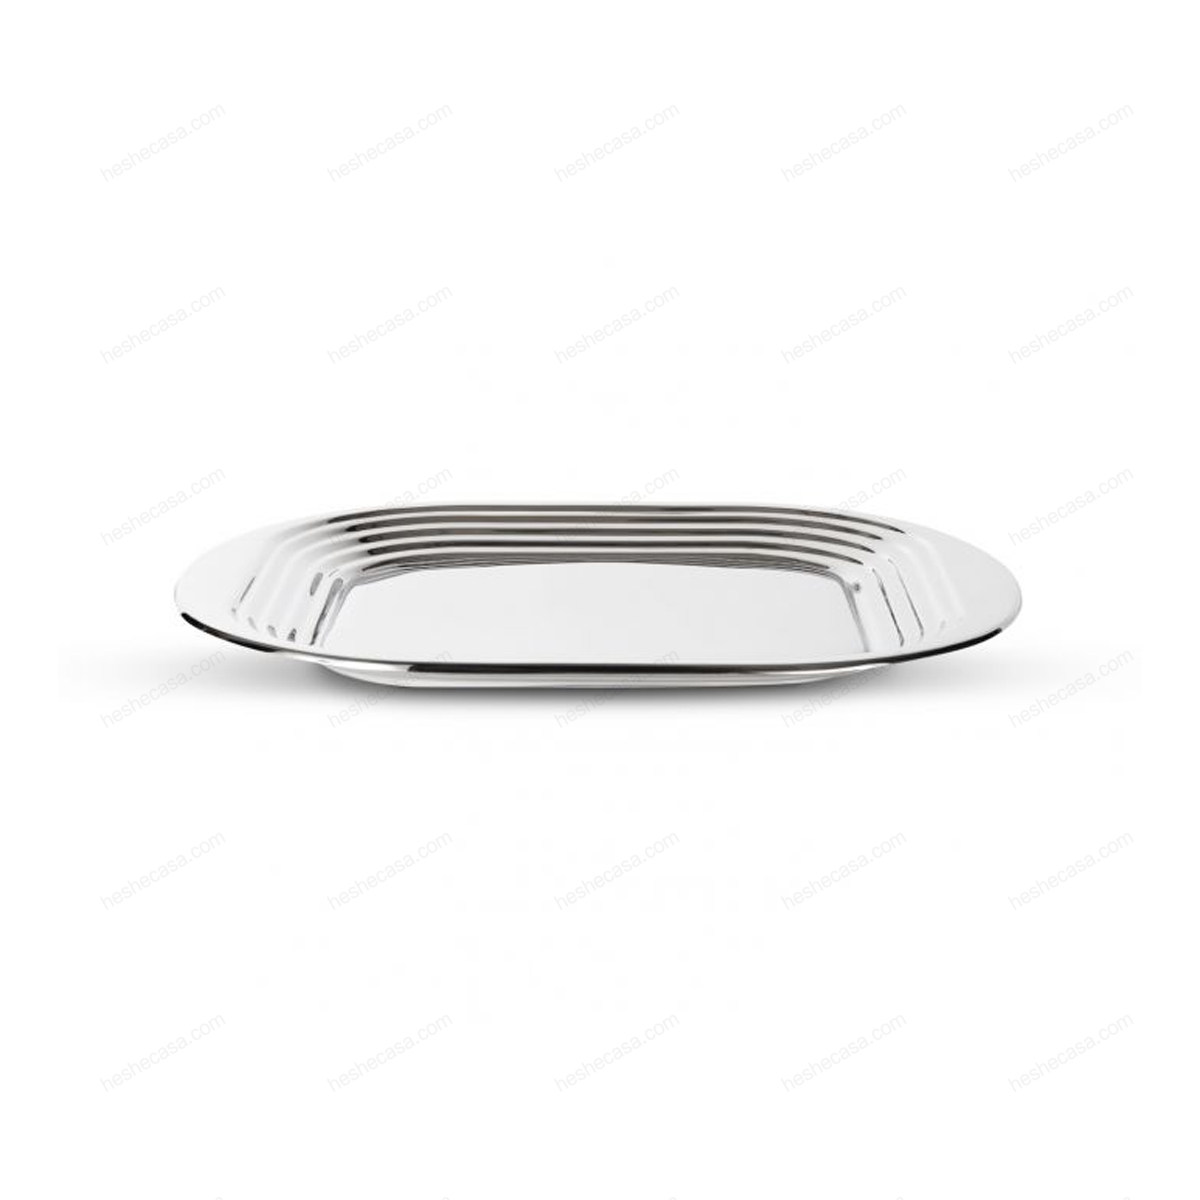 Form Tray Stainless Steel转盘/托盘